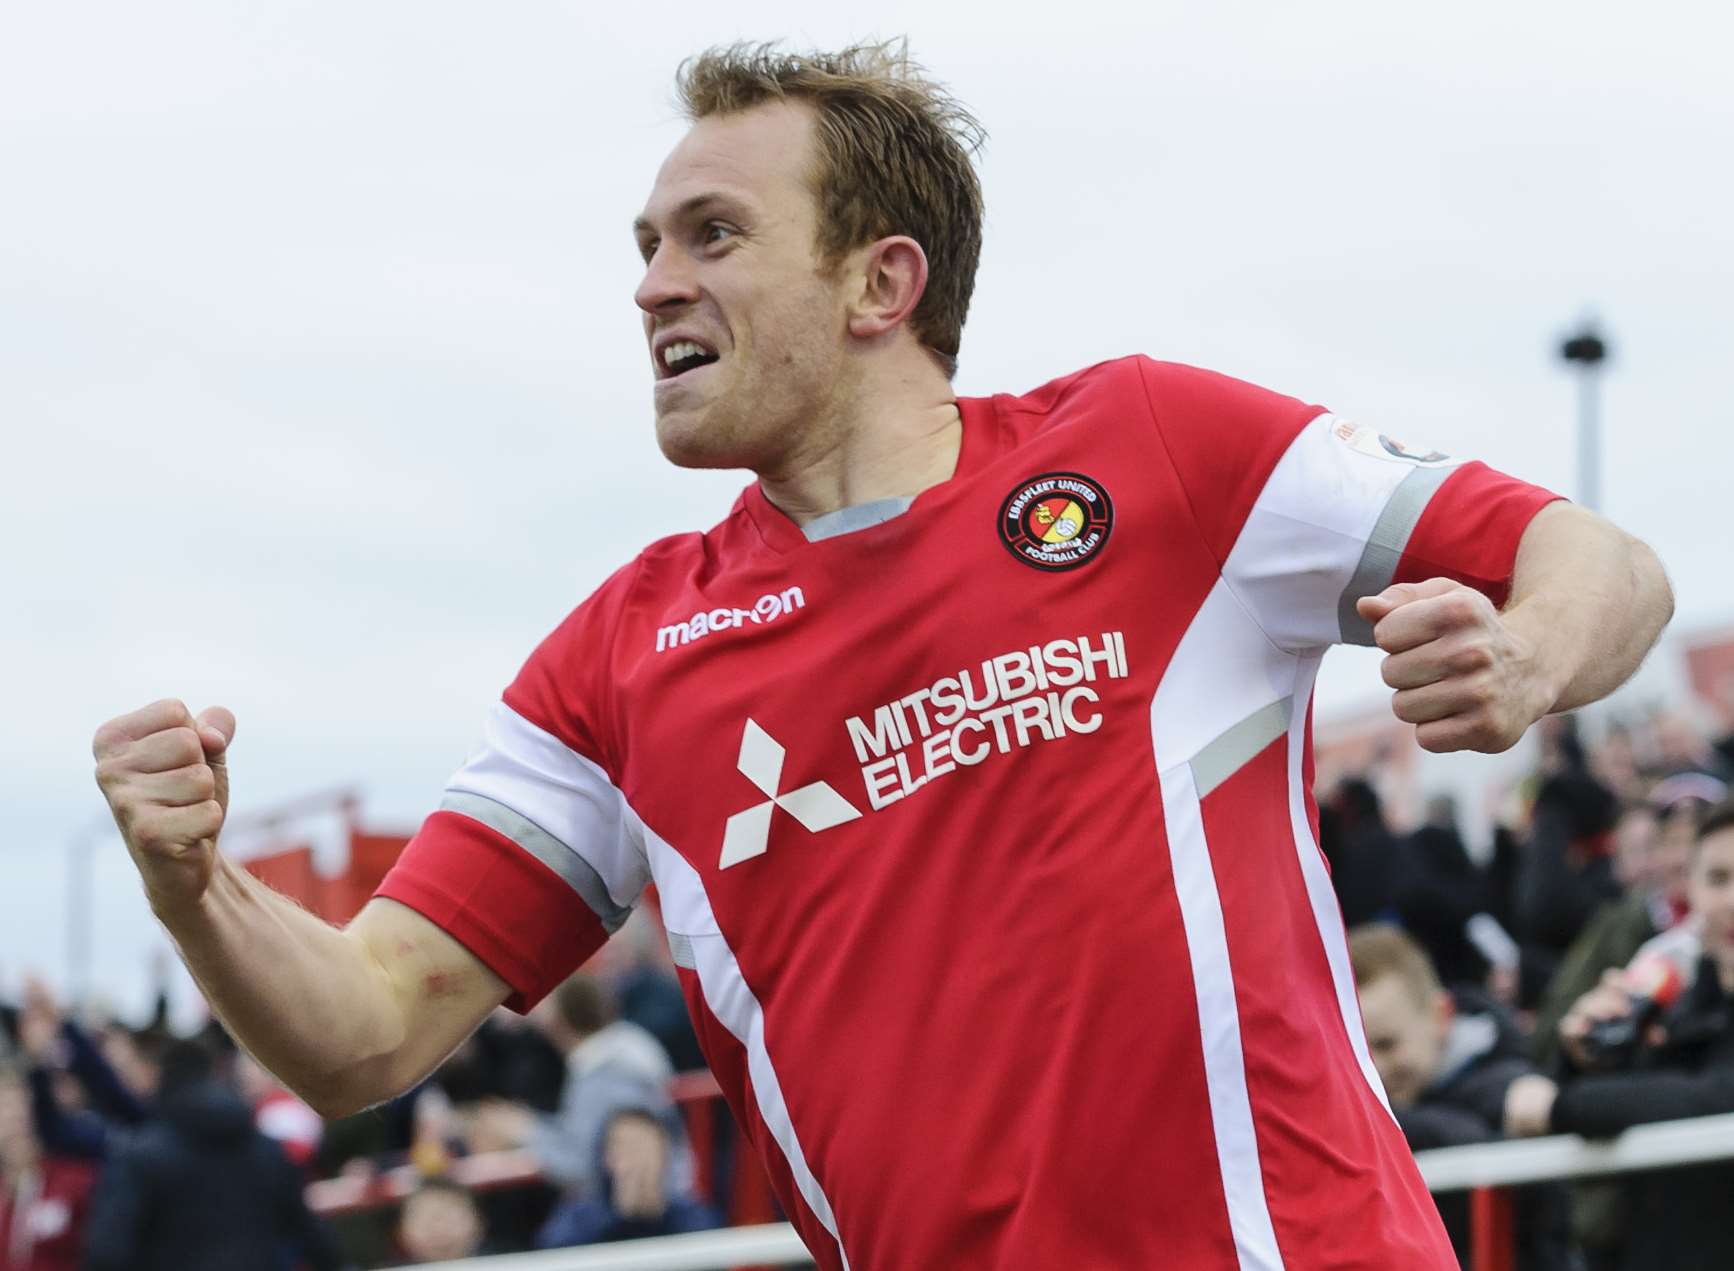 Stuart Lewis swapped Ebbsfleet for Maidstone Picture: Andy Payton